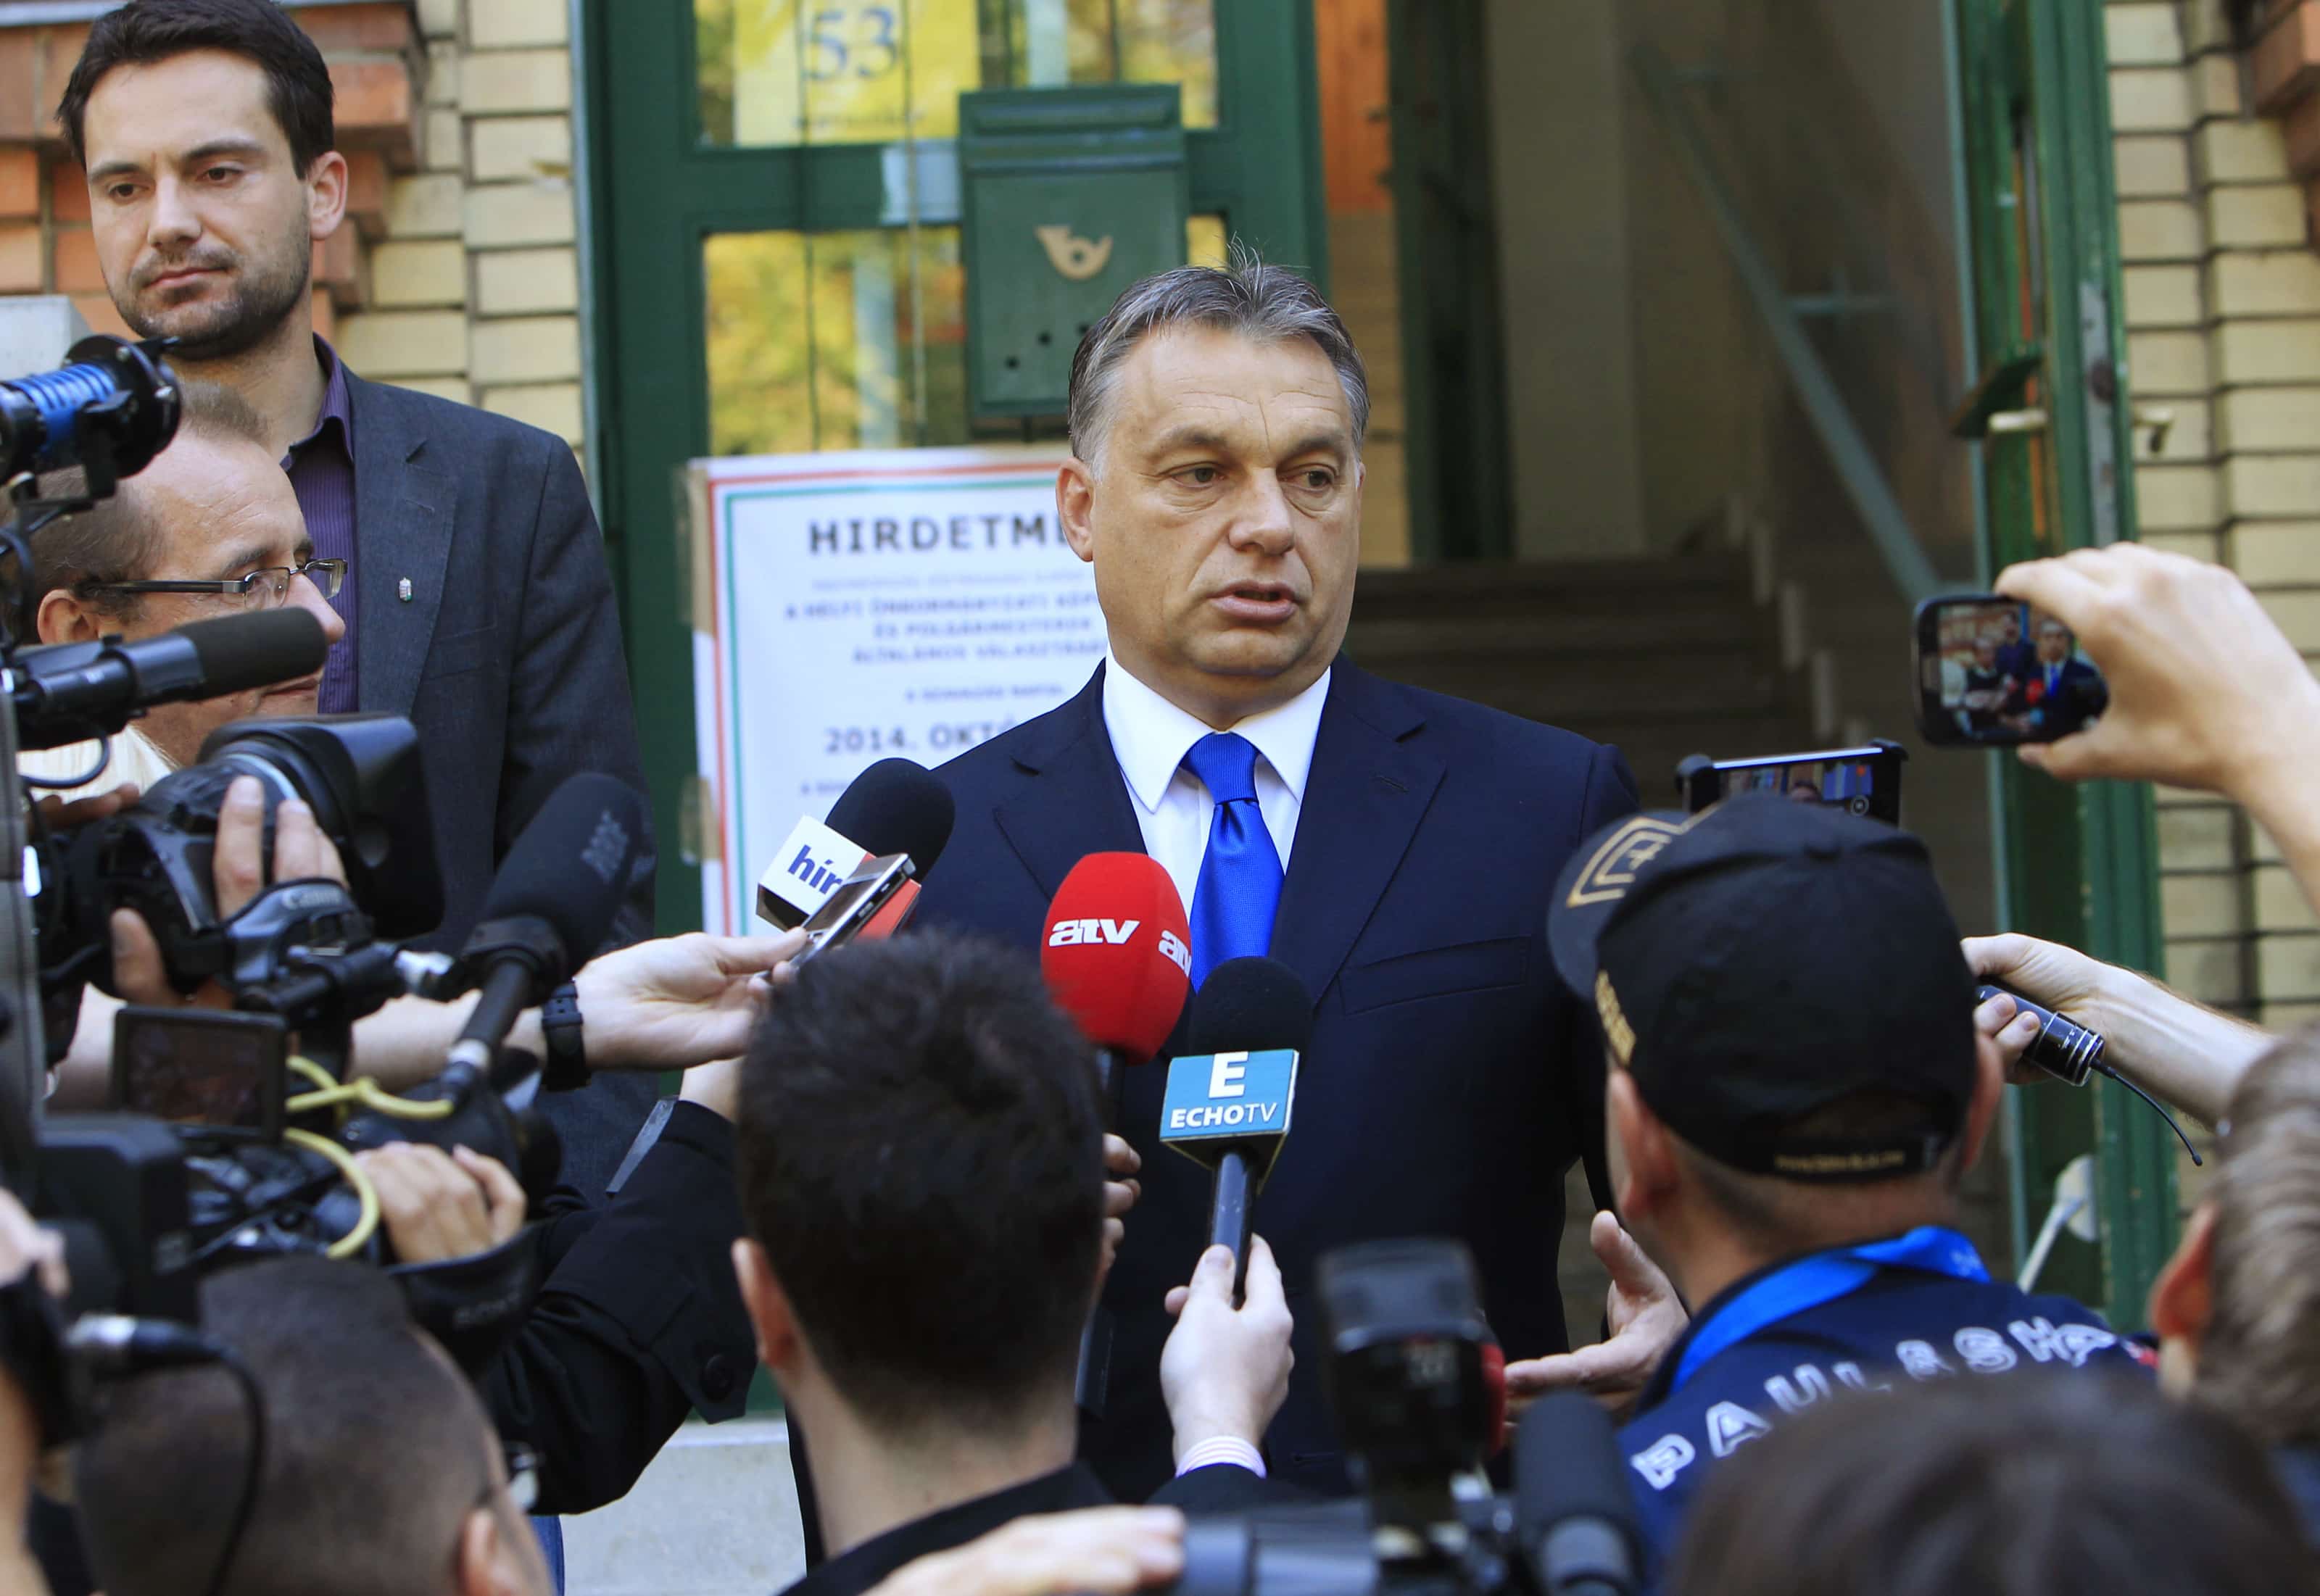 Hungary's Prime Minister Viktor Orban talks to journalists after casting his vote during Hungary's municipal elections in Budapest, October 12, 2014, REUTERS/Bernadett Szabo